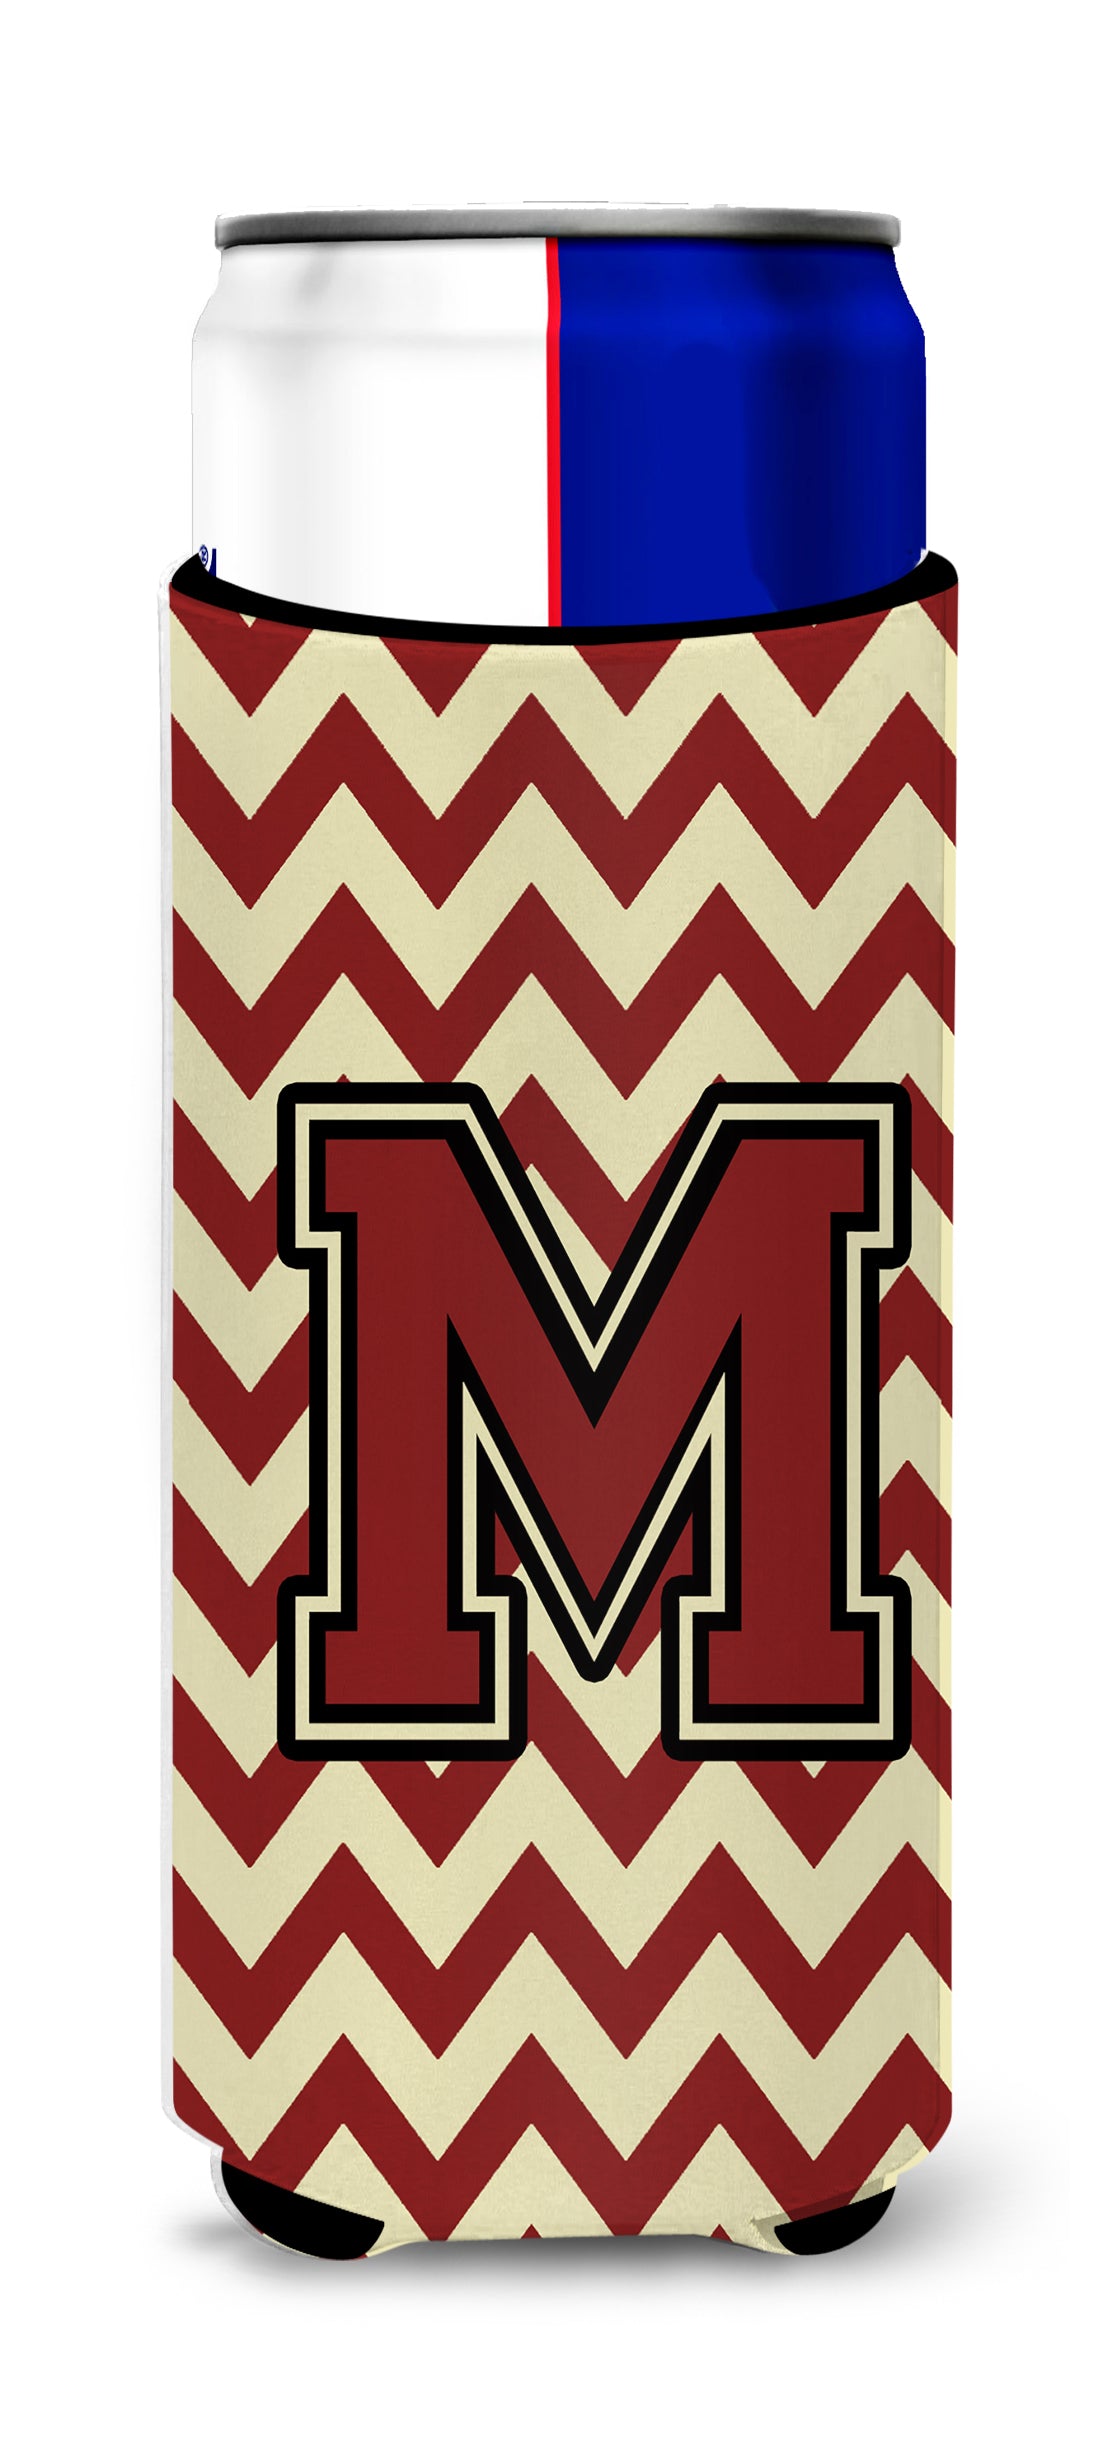 Letter M Chevron Maroon and Gold Ultra Beverage Insulators for slim cans CJ1061-MMUK